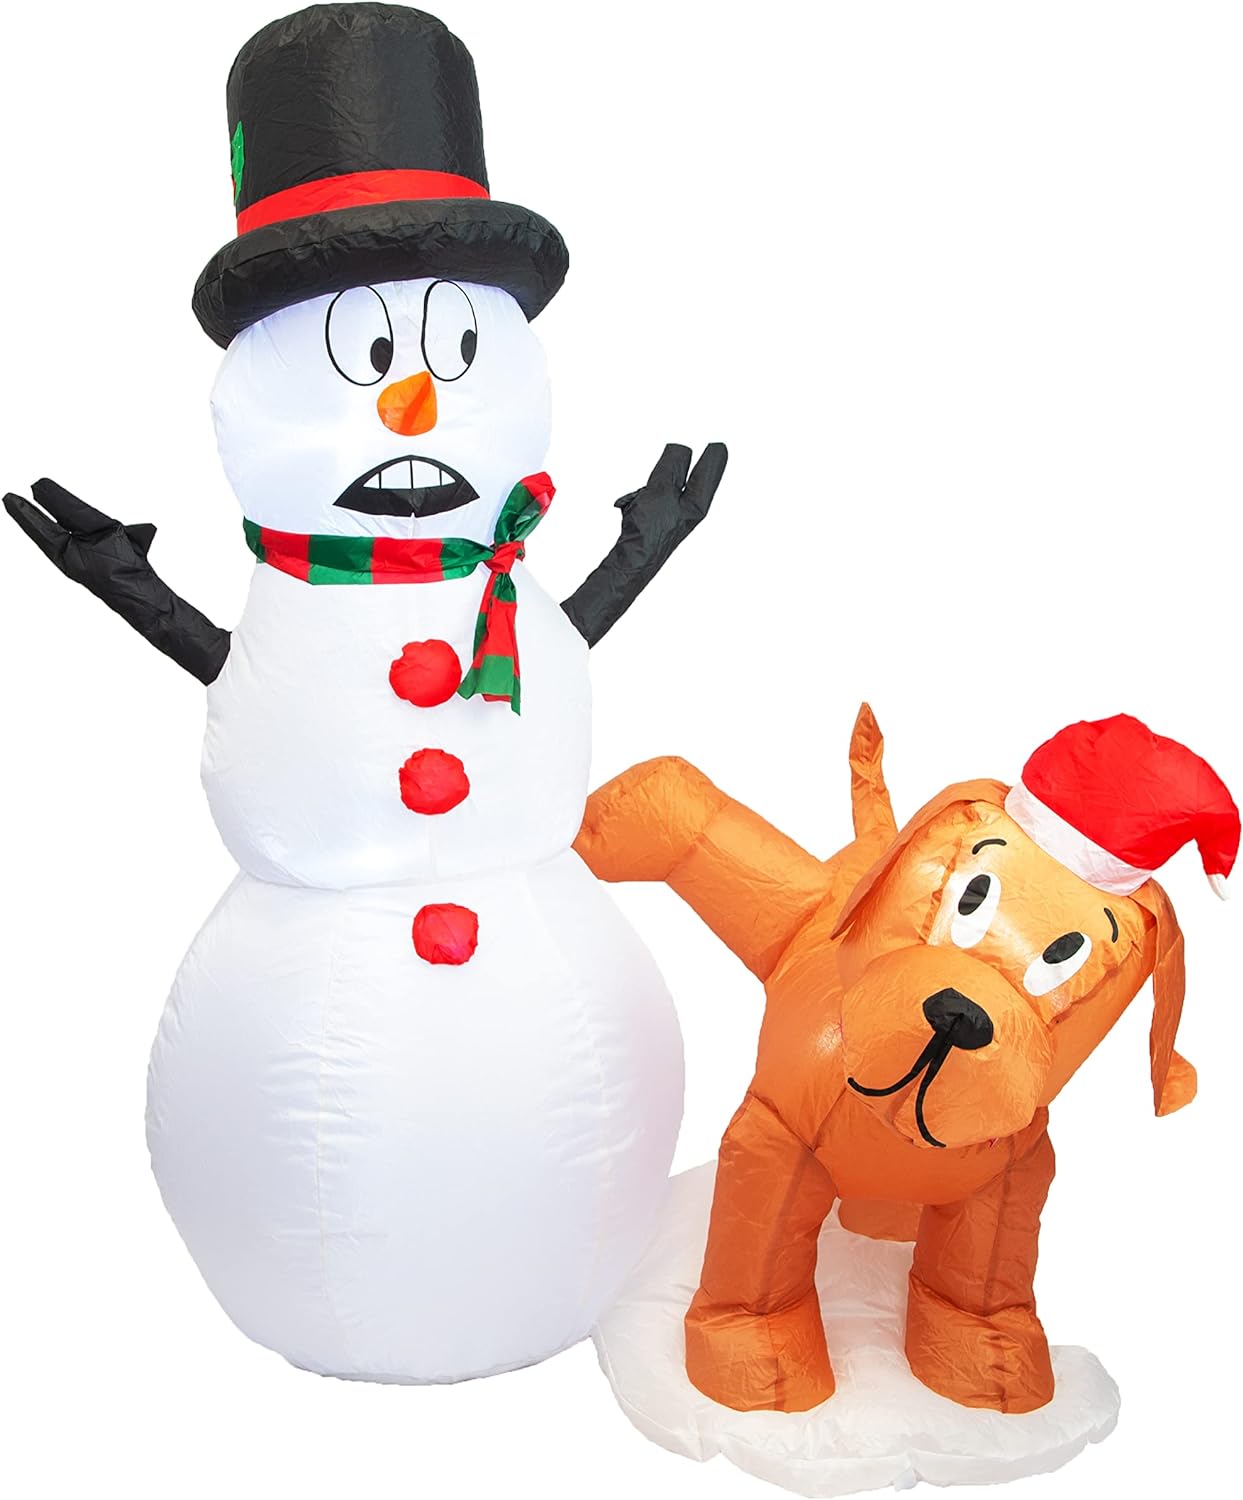 PRODUCTZ Inflatable Snowman and Peeing Dog